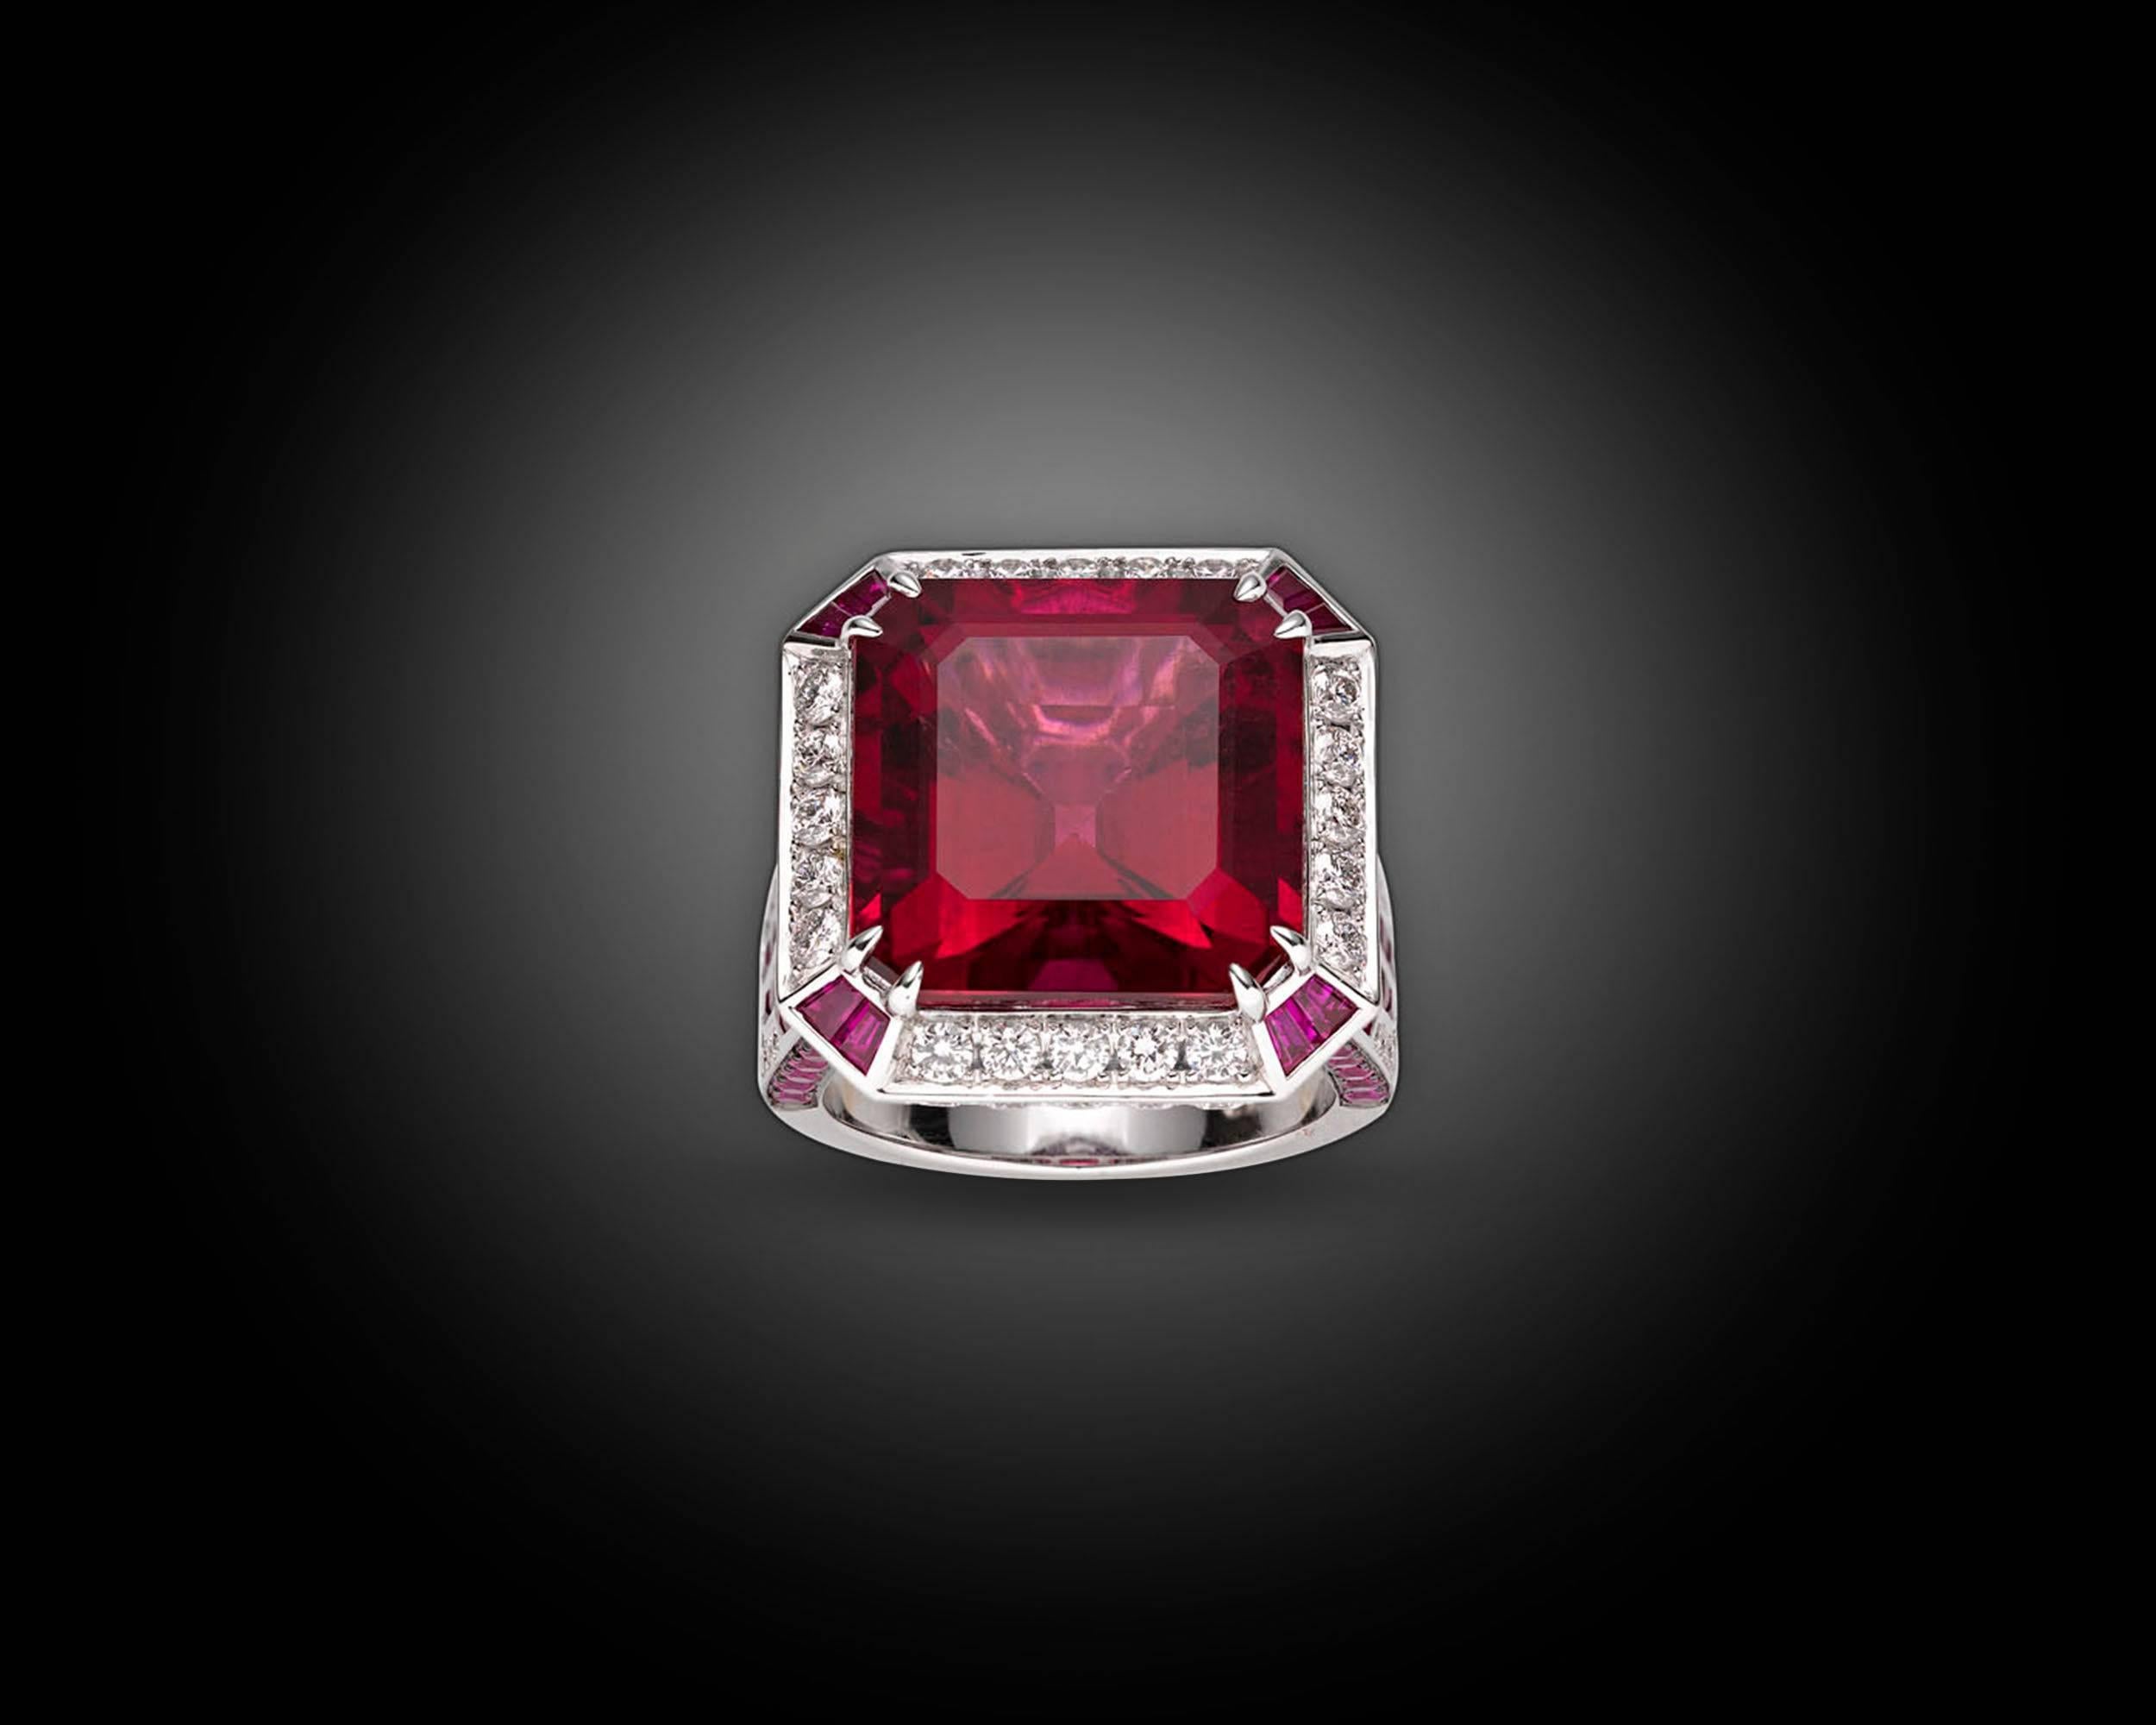 Exuding all of the glamour of the Art Deco era, this striking cocktail ring boasts a stunning rubellite tourmaline at its center. Weighing a breathtaking 16.12 carats, the striking gemstone displays a deeply saturated, rich crimson hue that is